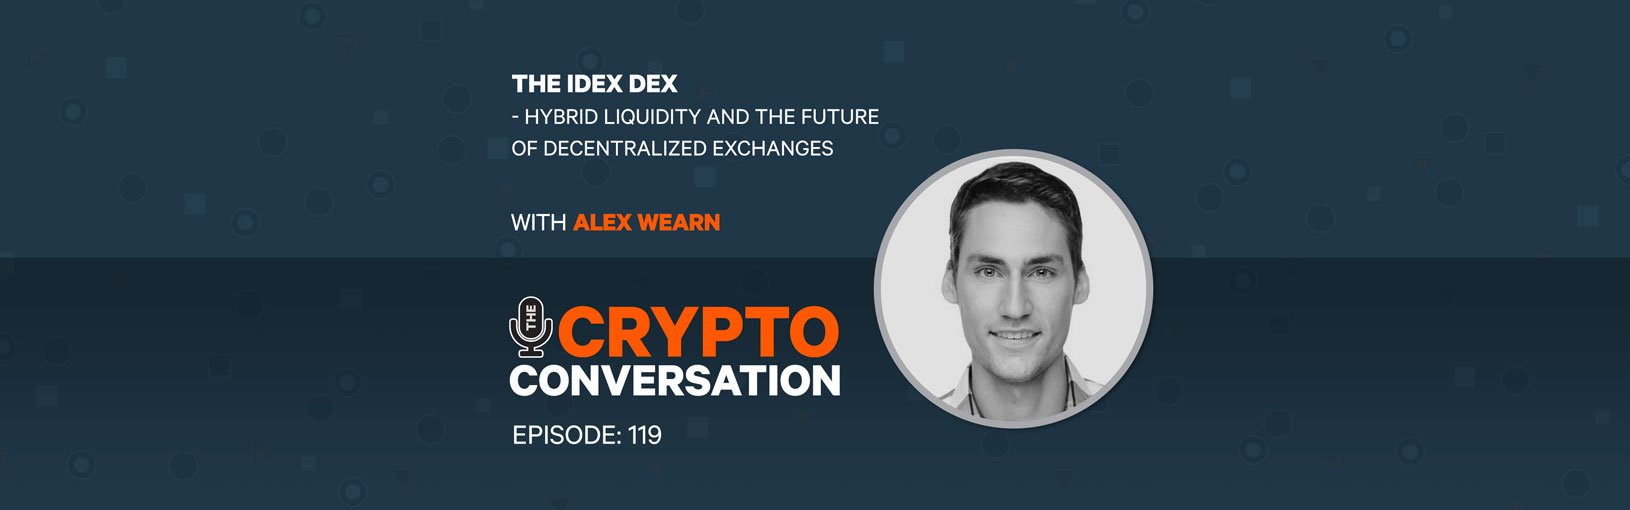 The IDEX DEX – Hybrid Liquidity and the future of decentralized exchanges